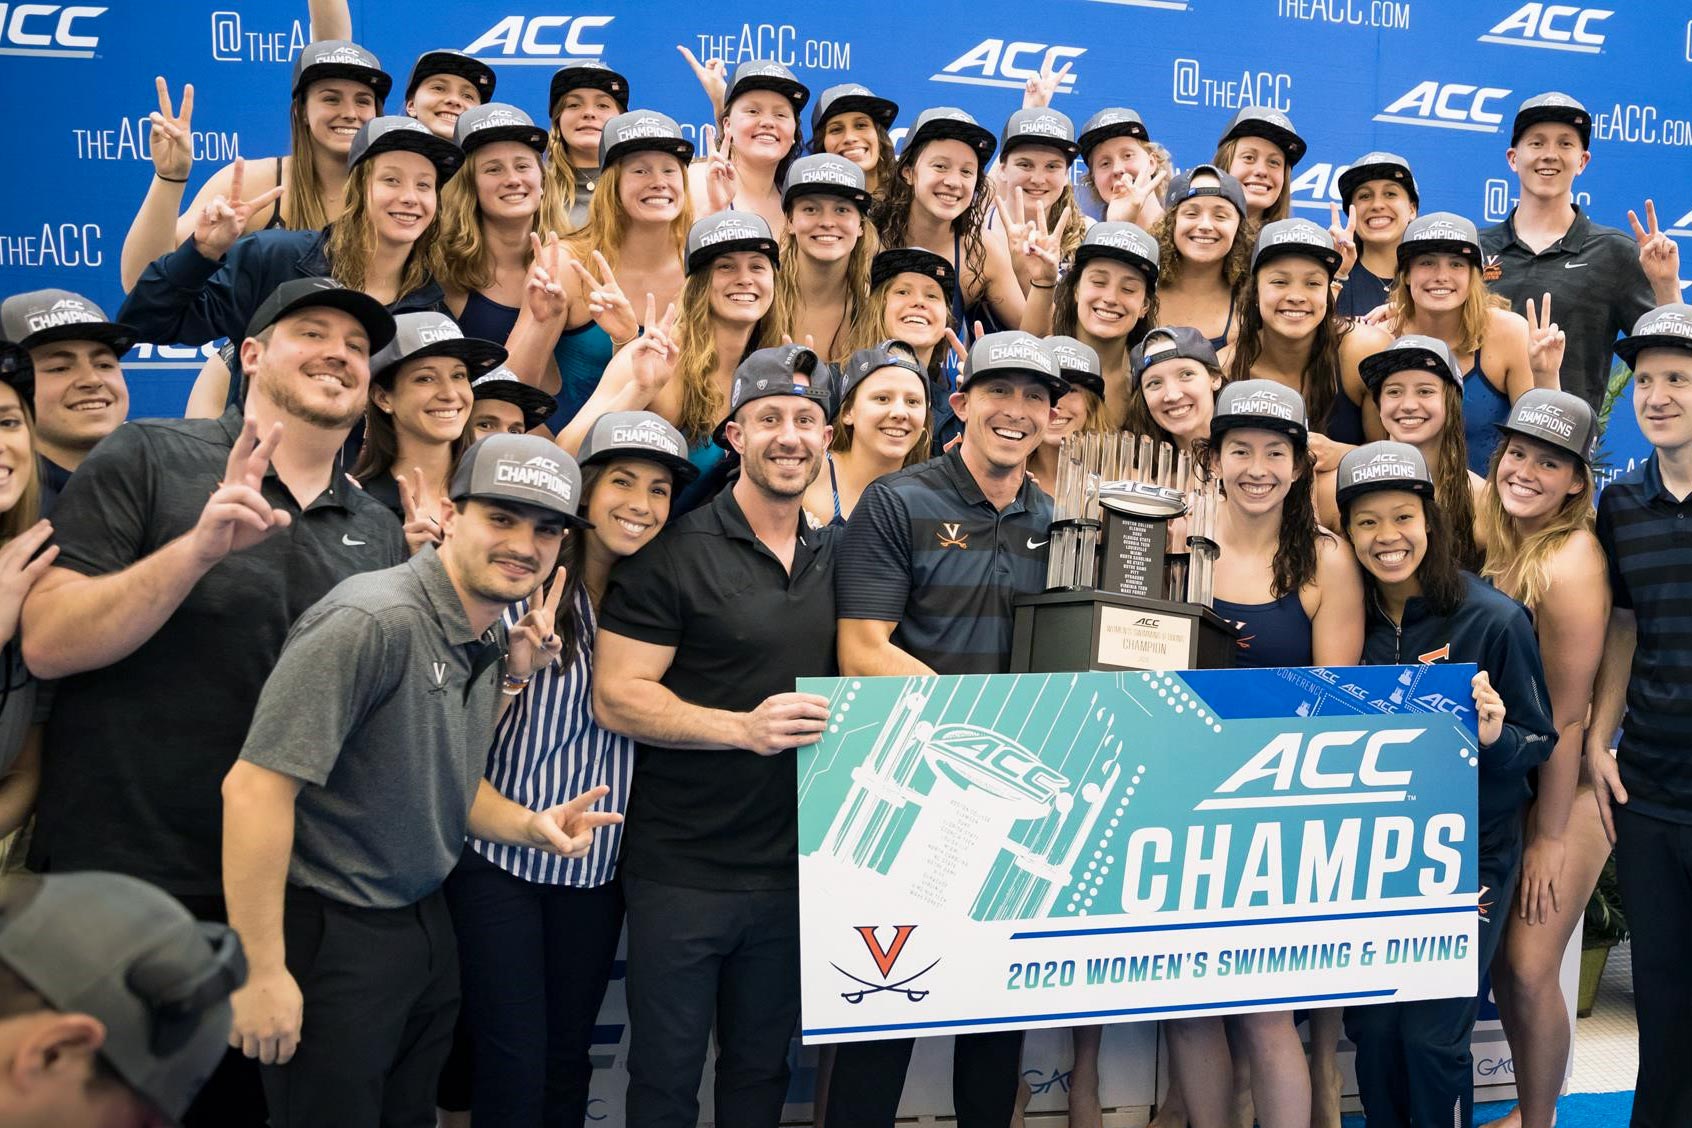 The Cavalier women’s swimming and diving team pose together holding the ACC trophy and a banner that reads ACC Champs 2020 Women's swimming & Diving